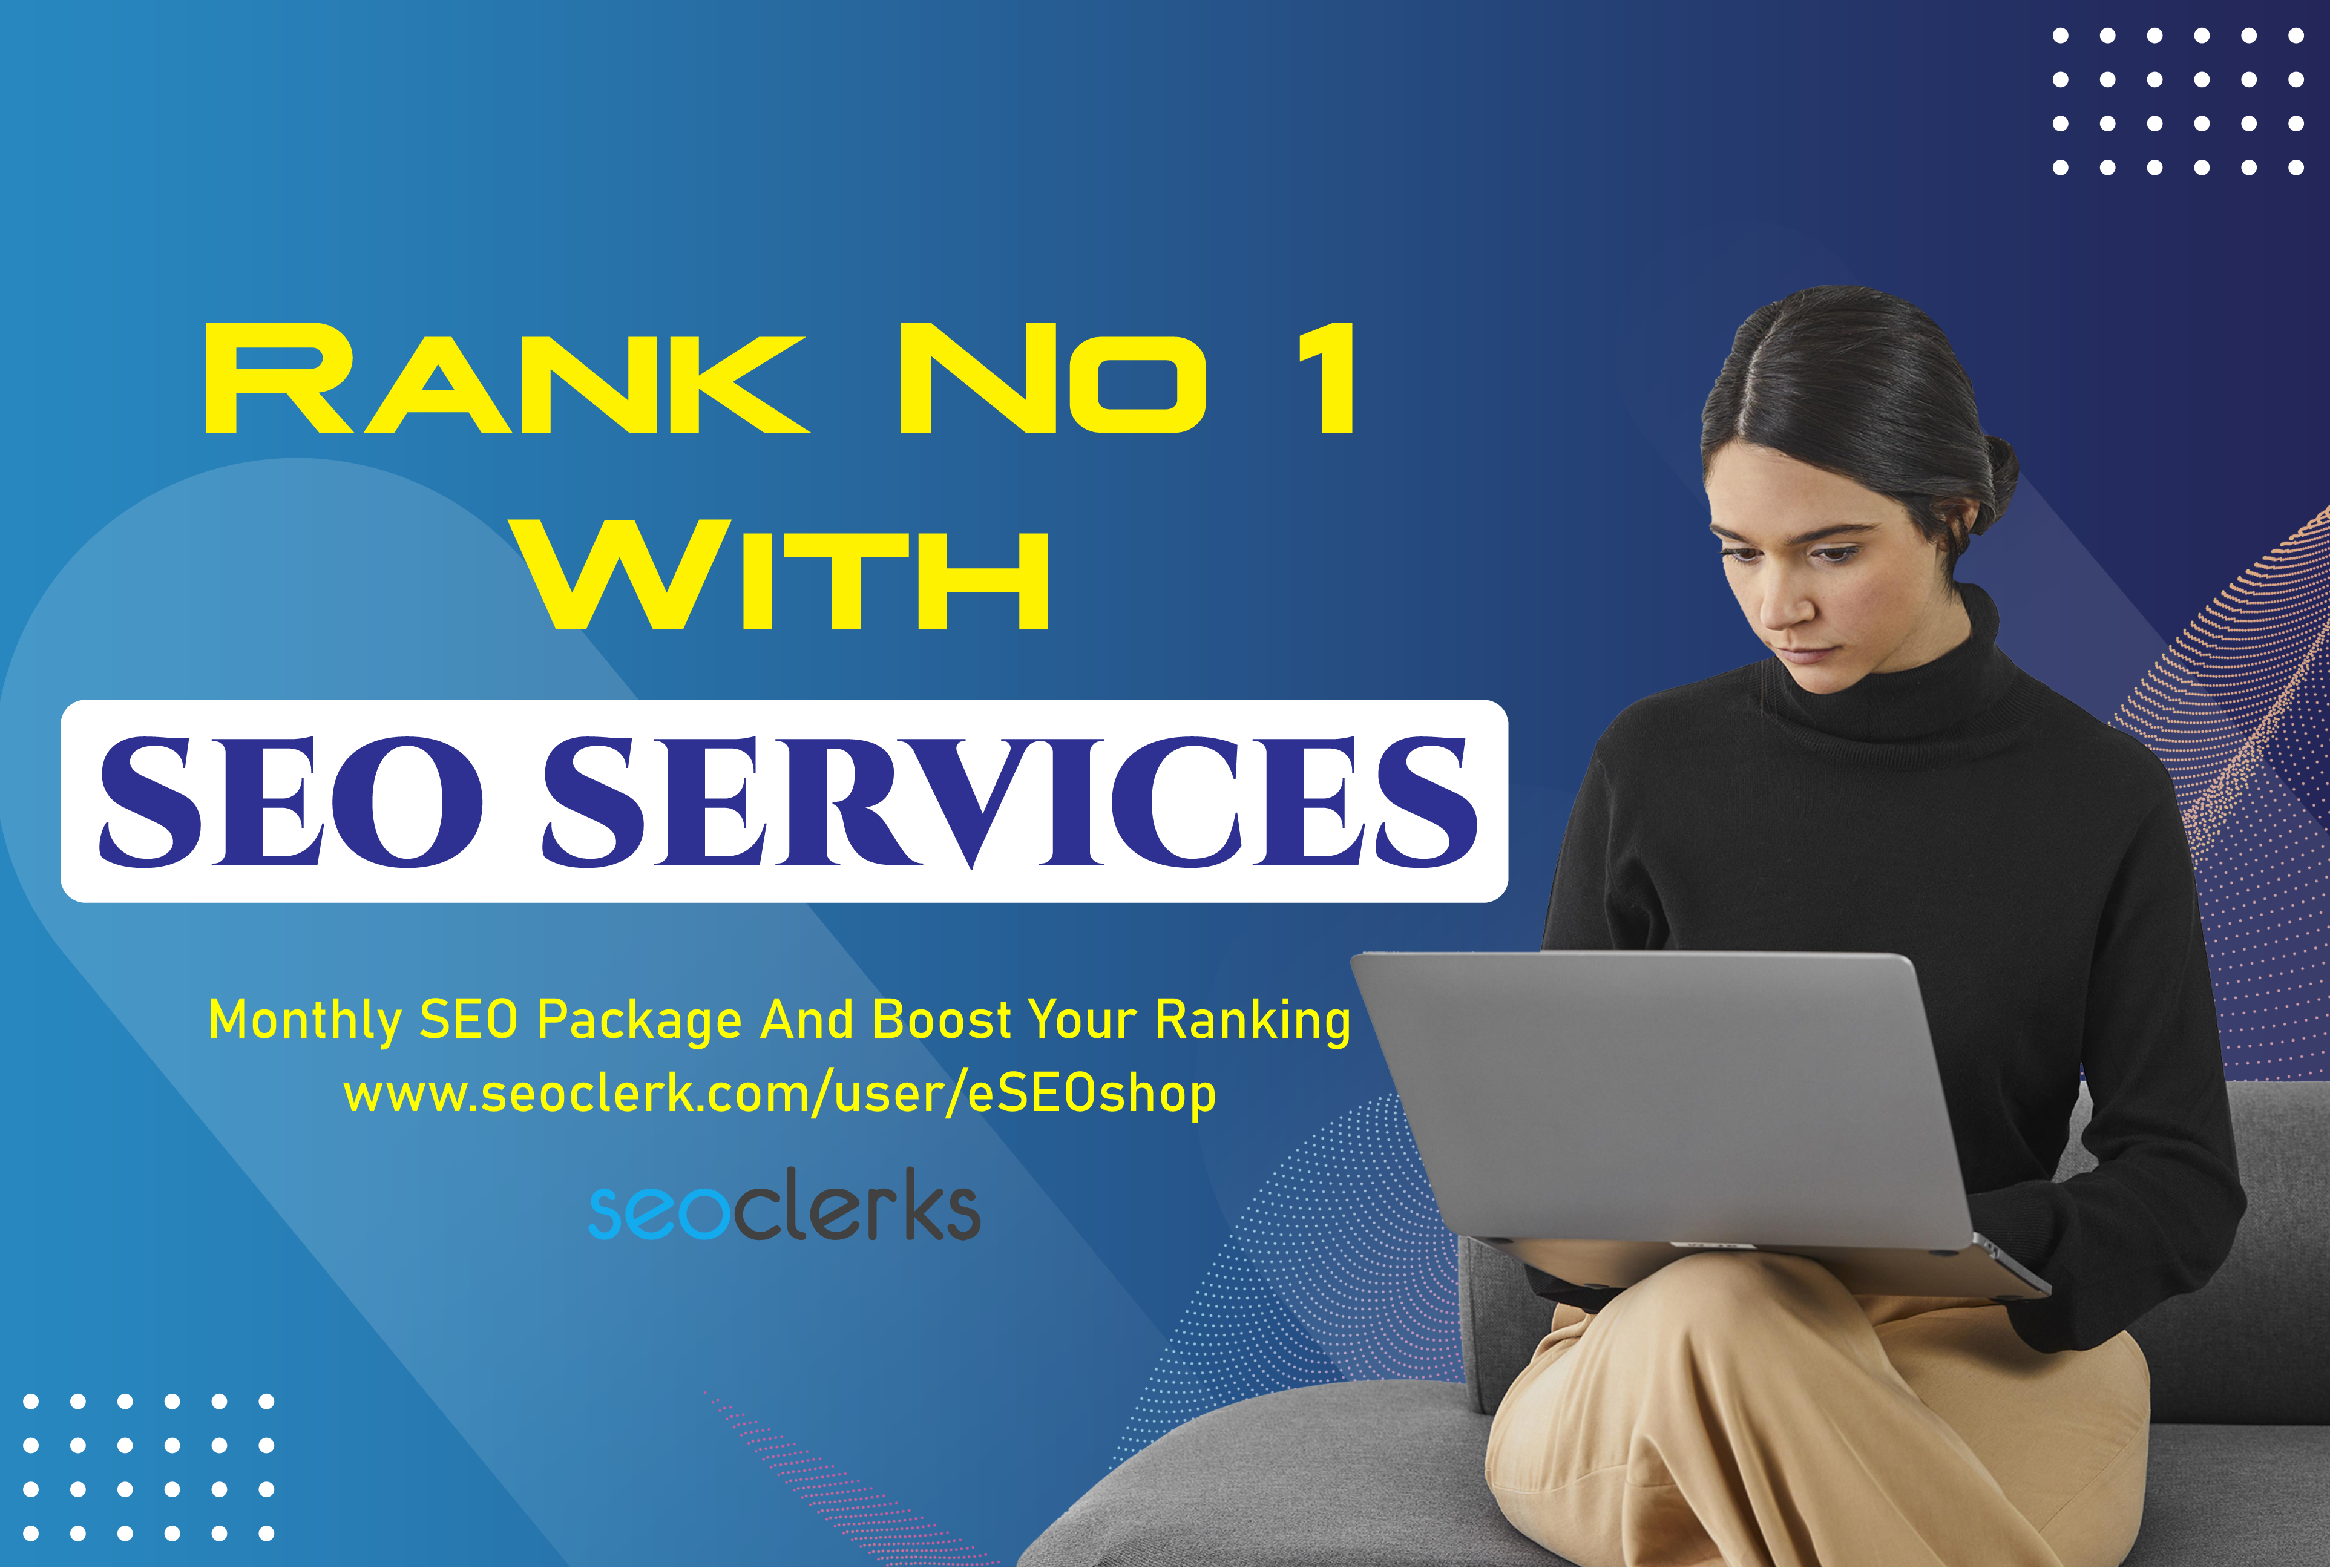 I will do complete monthly SEO service with quality backlinks for high google ranking